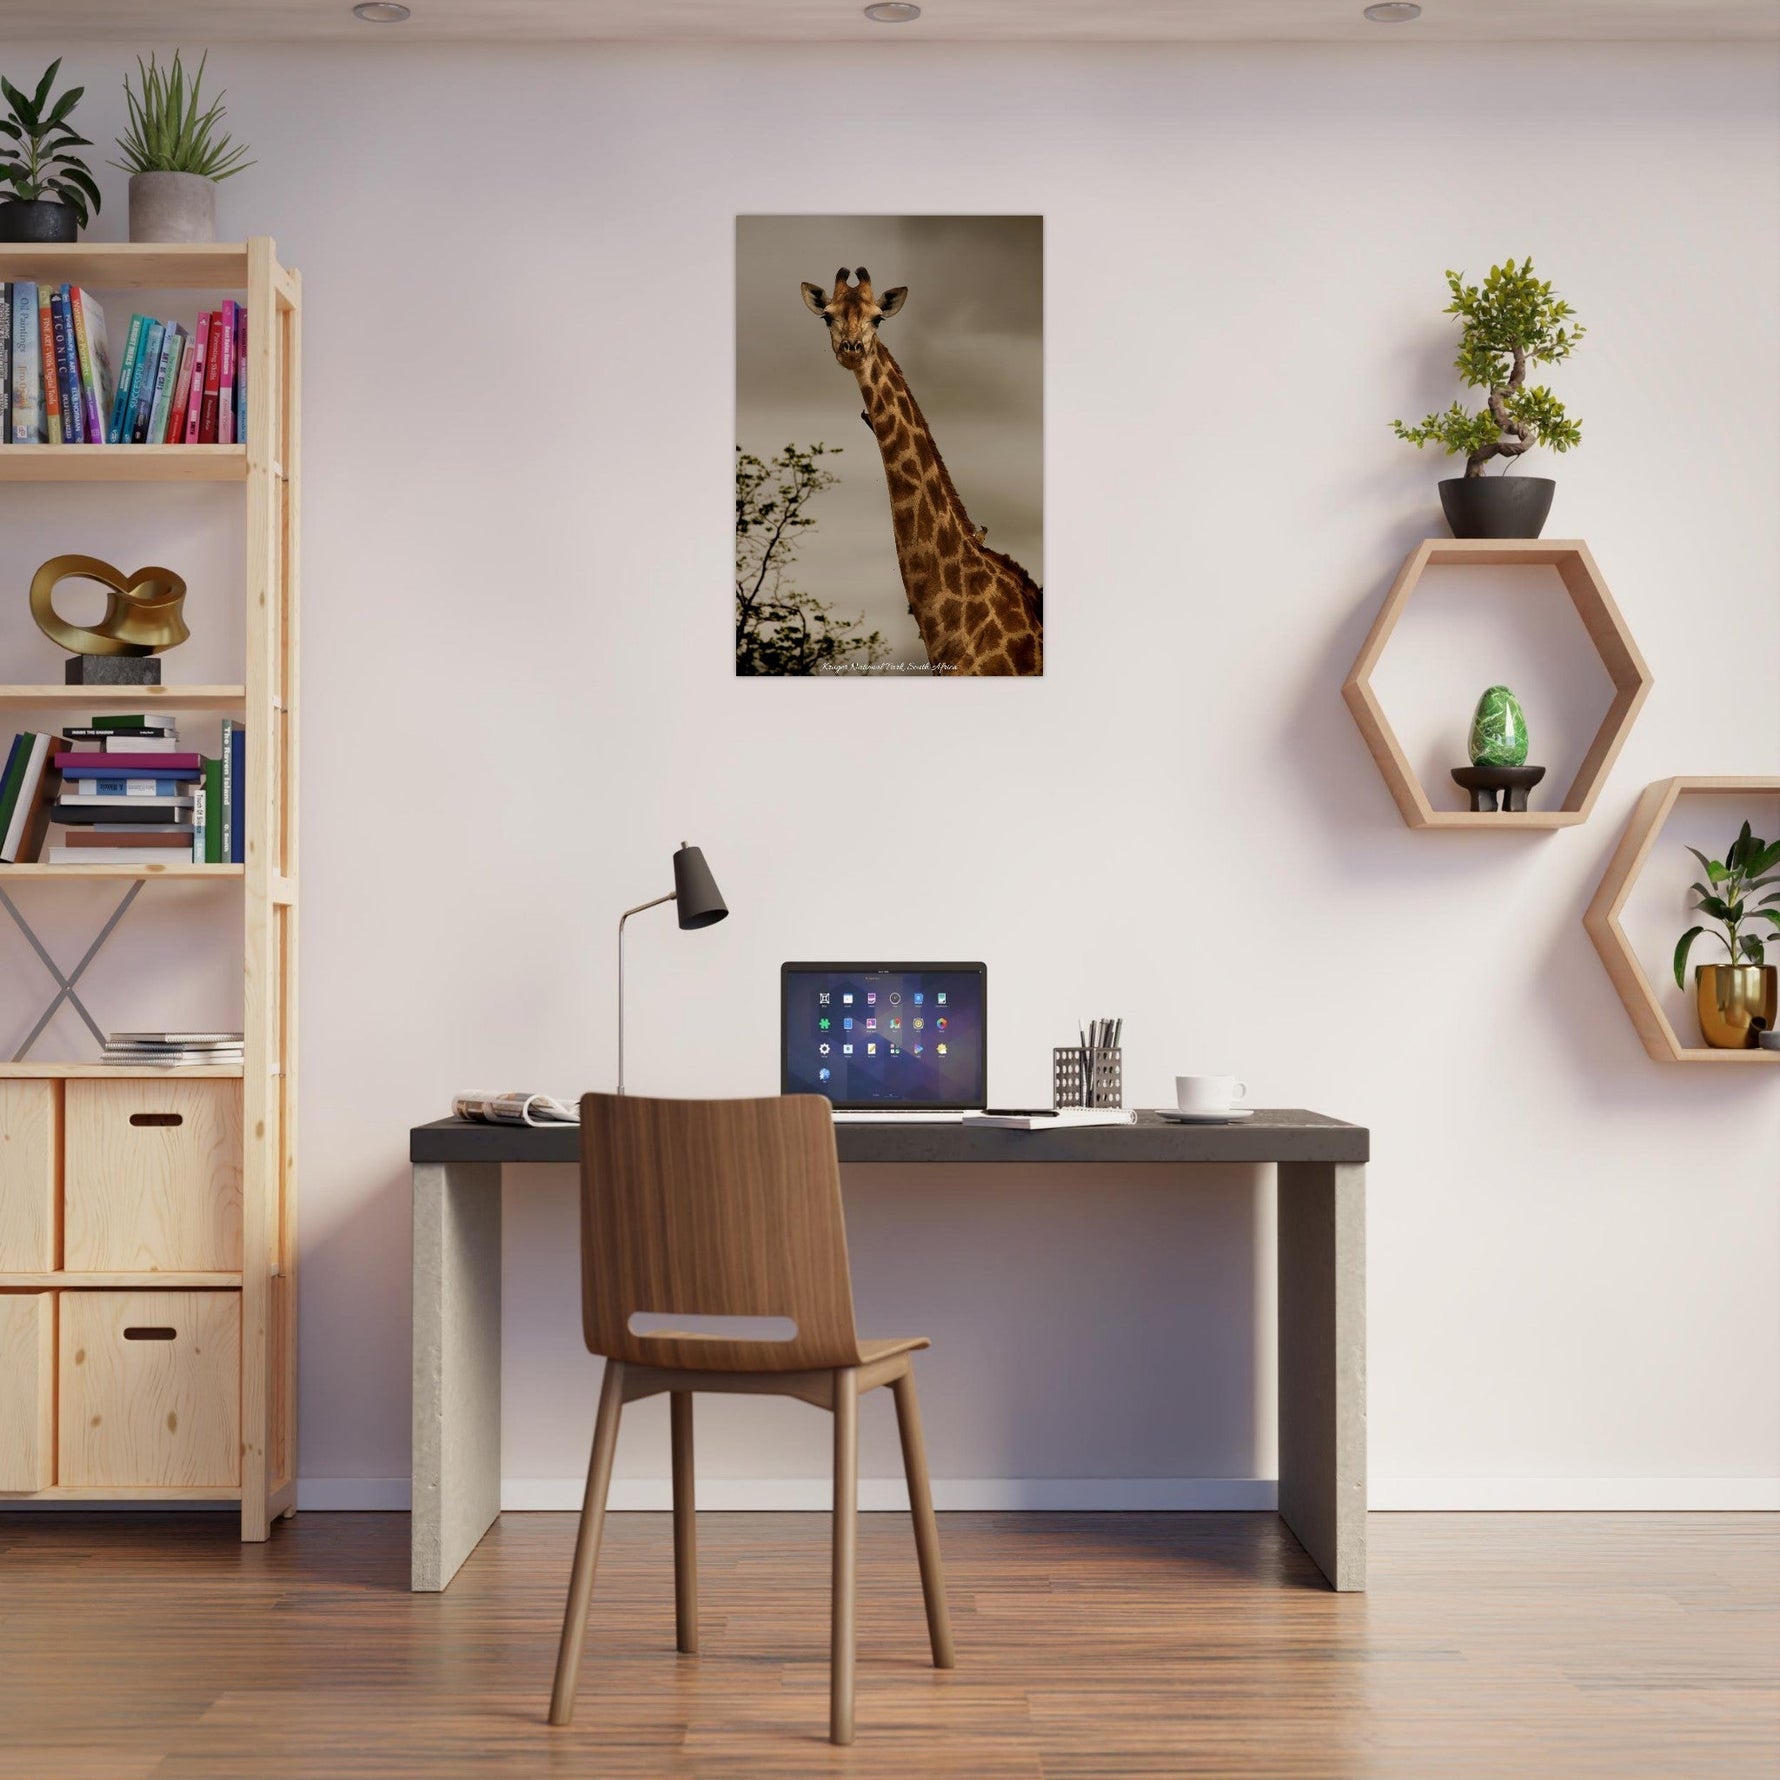 OPTIMIZE_BACKUP_PRODUCT_Birds Perched on Giraffe wall art. Nature Photo Prints by Picture This